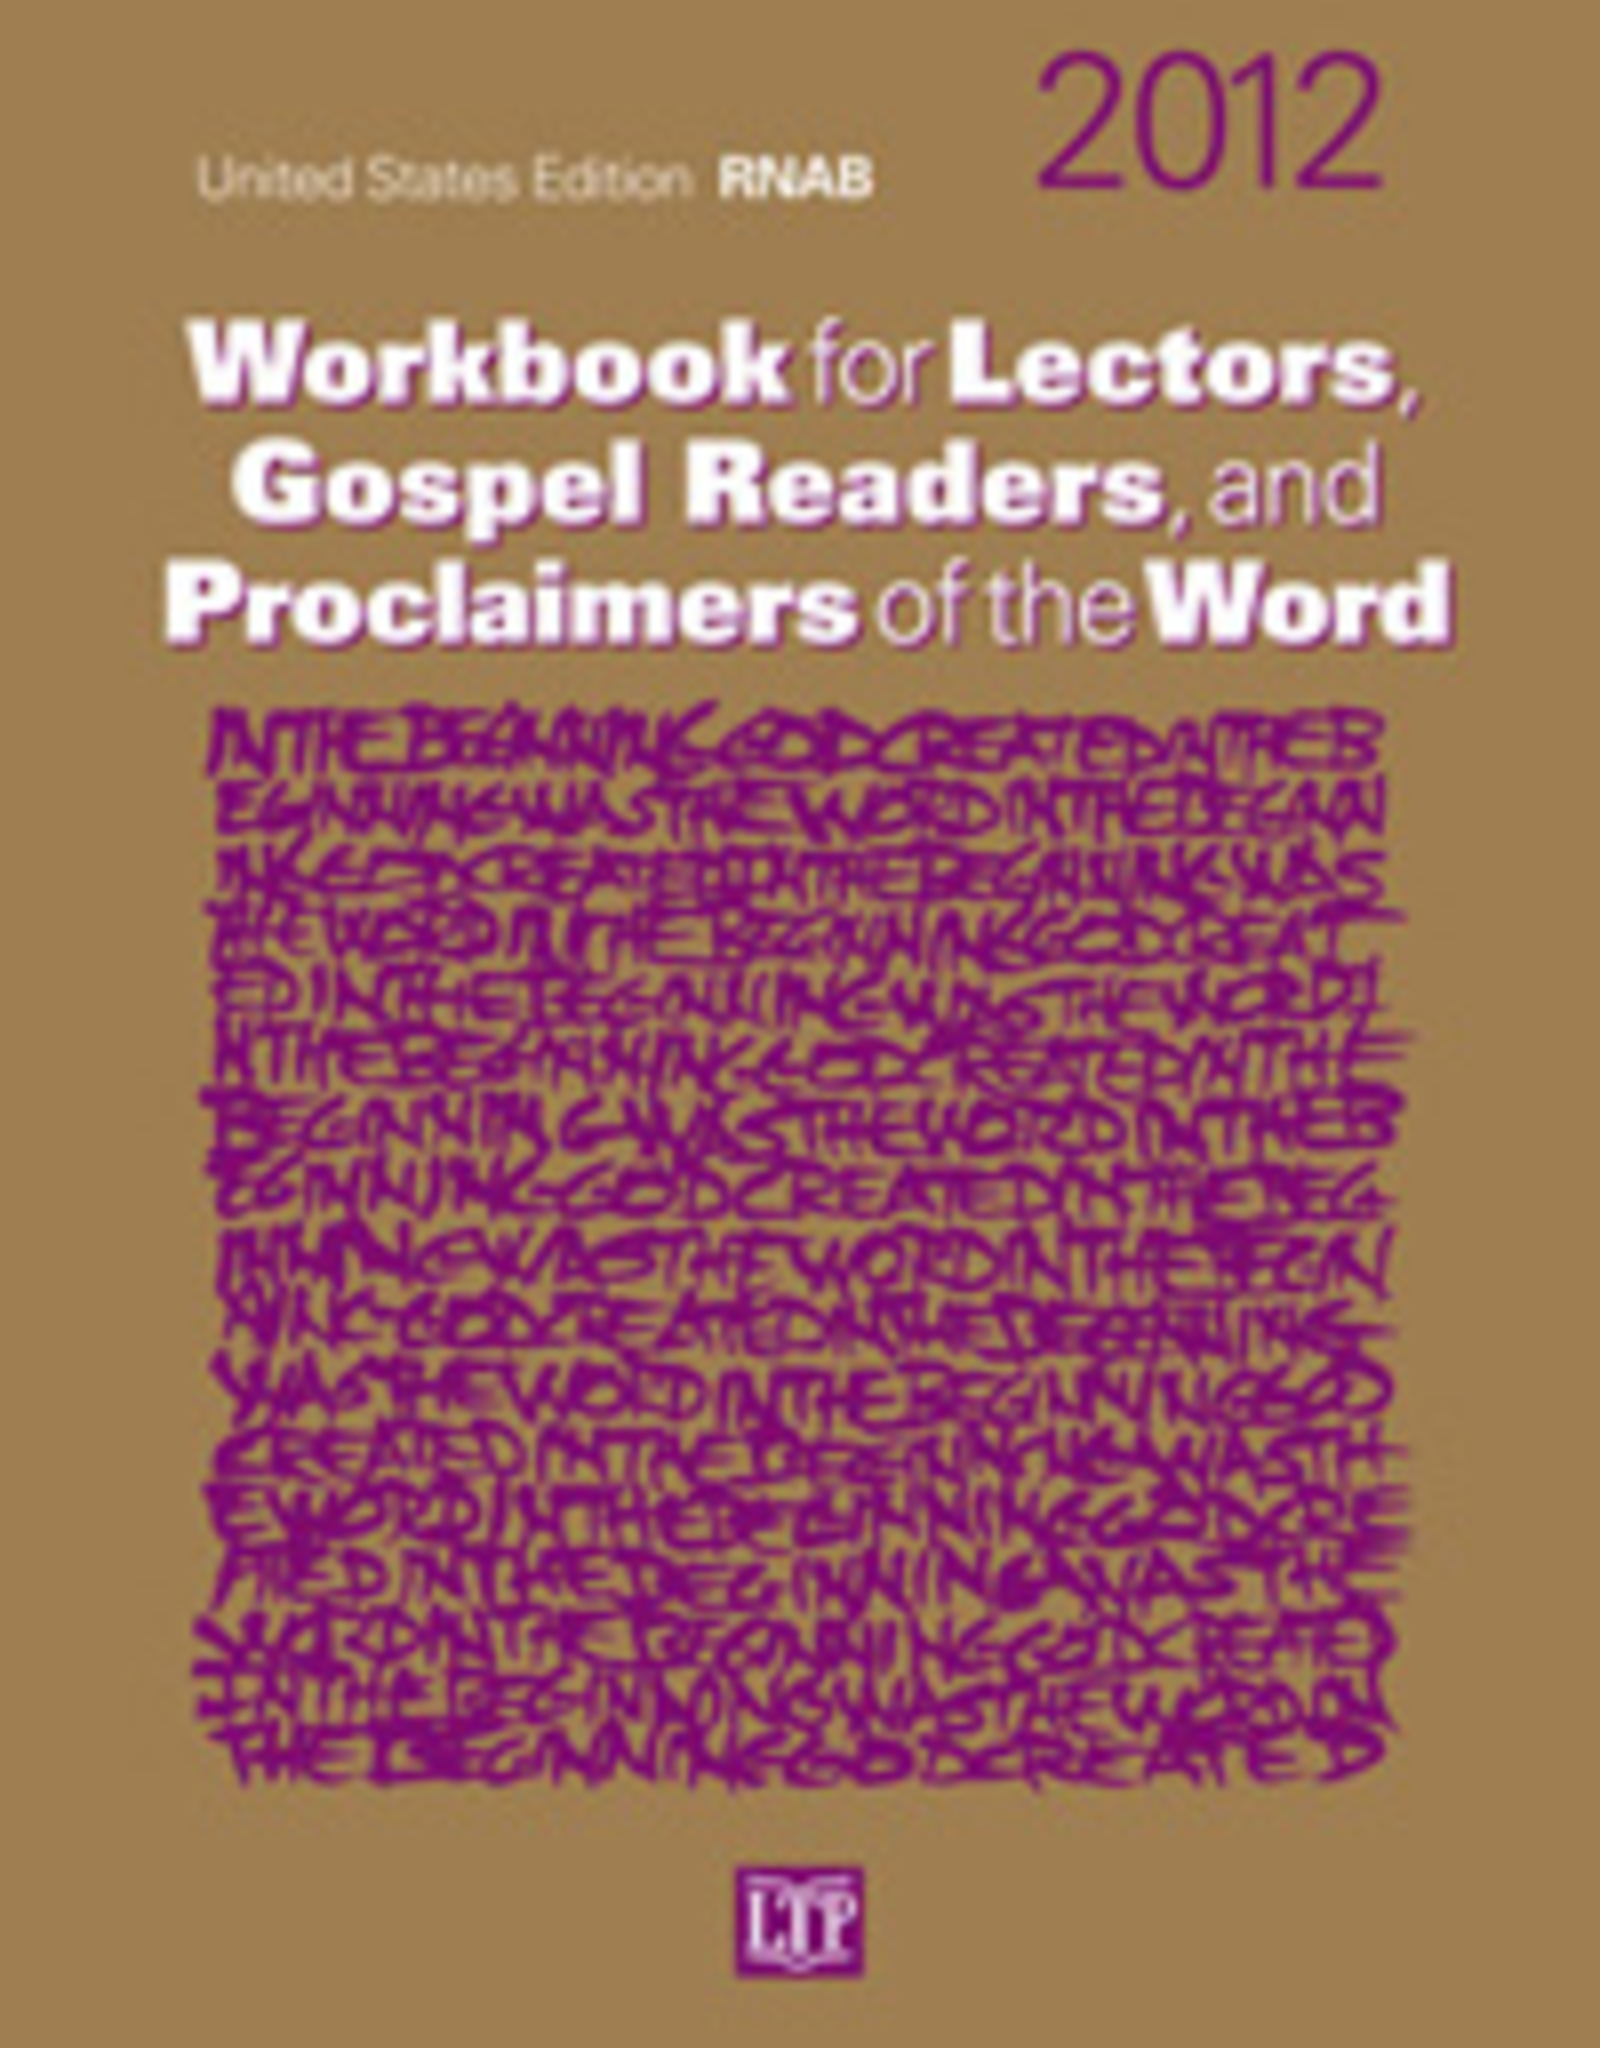 Liturgical Training Press Workbook for Lectors, Gospel Readers and Proclaimers of the Word (2012 US Edition)